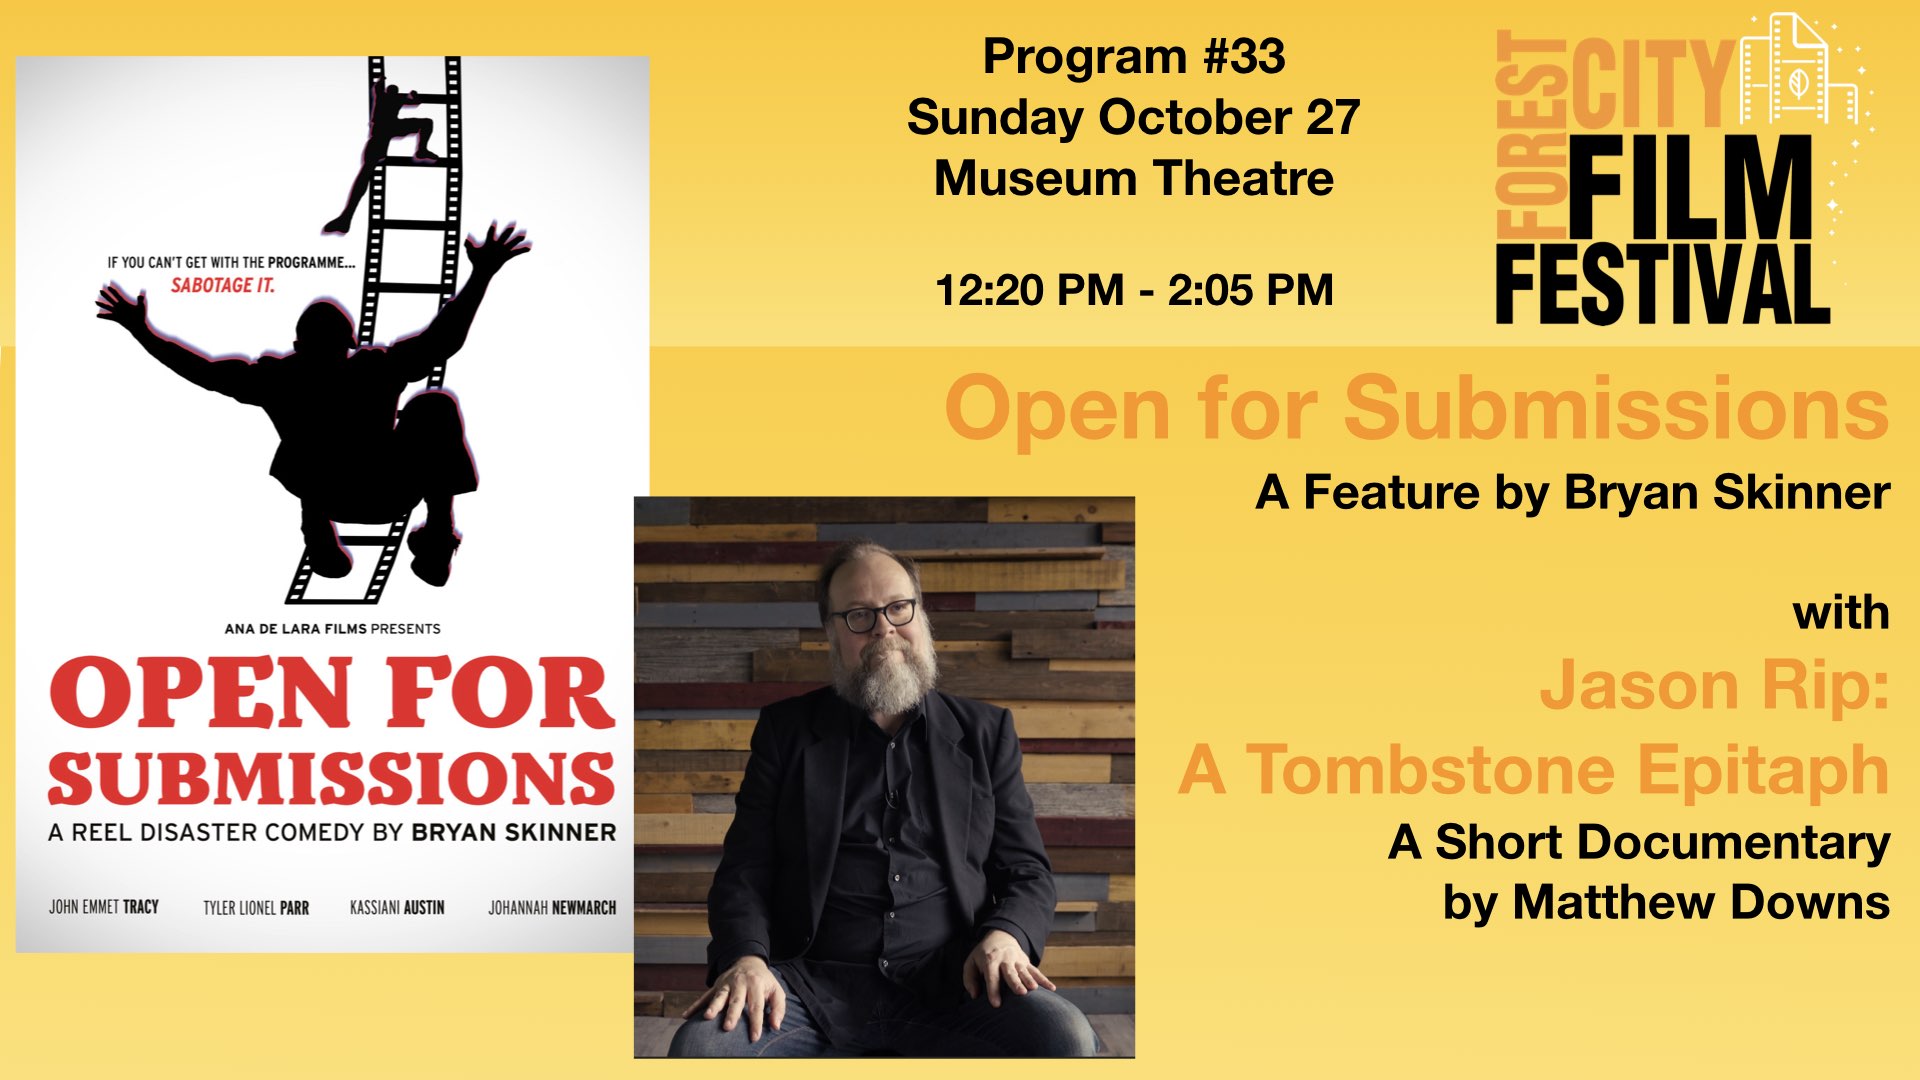 FCFF 2019 - Sunday early afternoon at  Museum Theatre #33 - Open for Submissions with Jason Rip: A Tombstone Epitaph